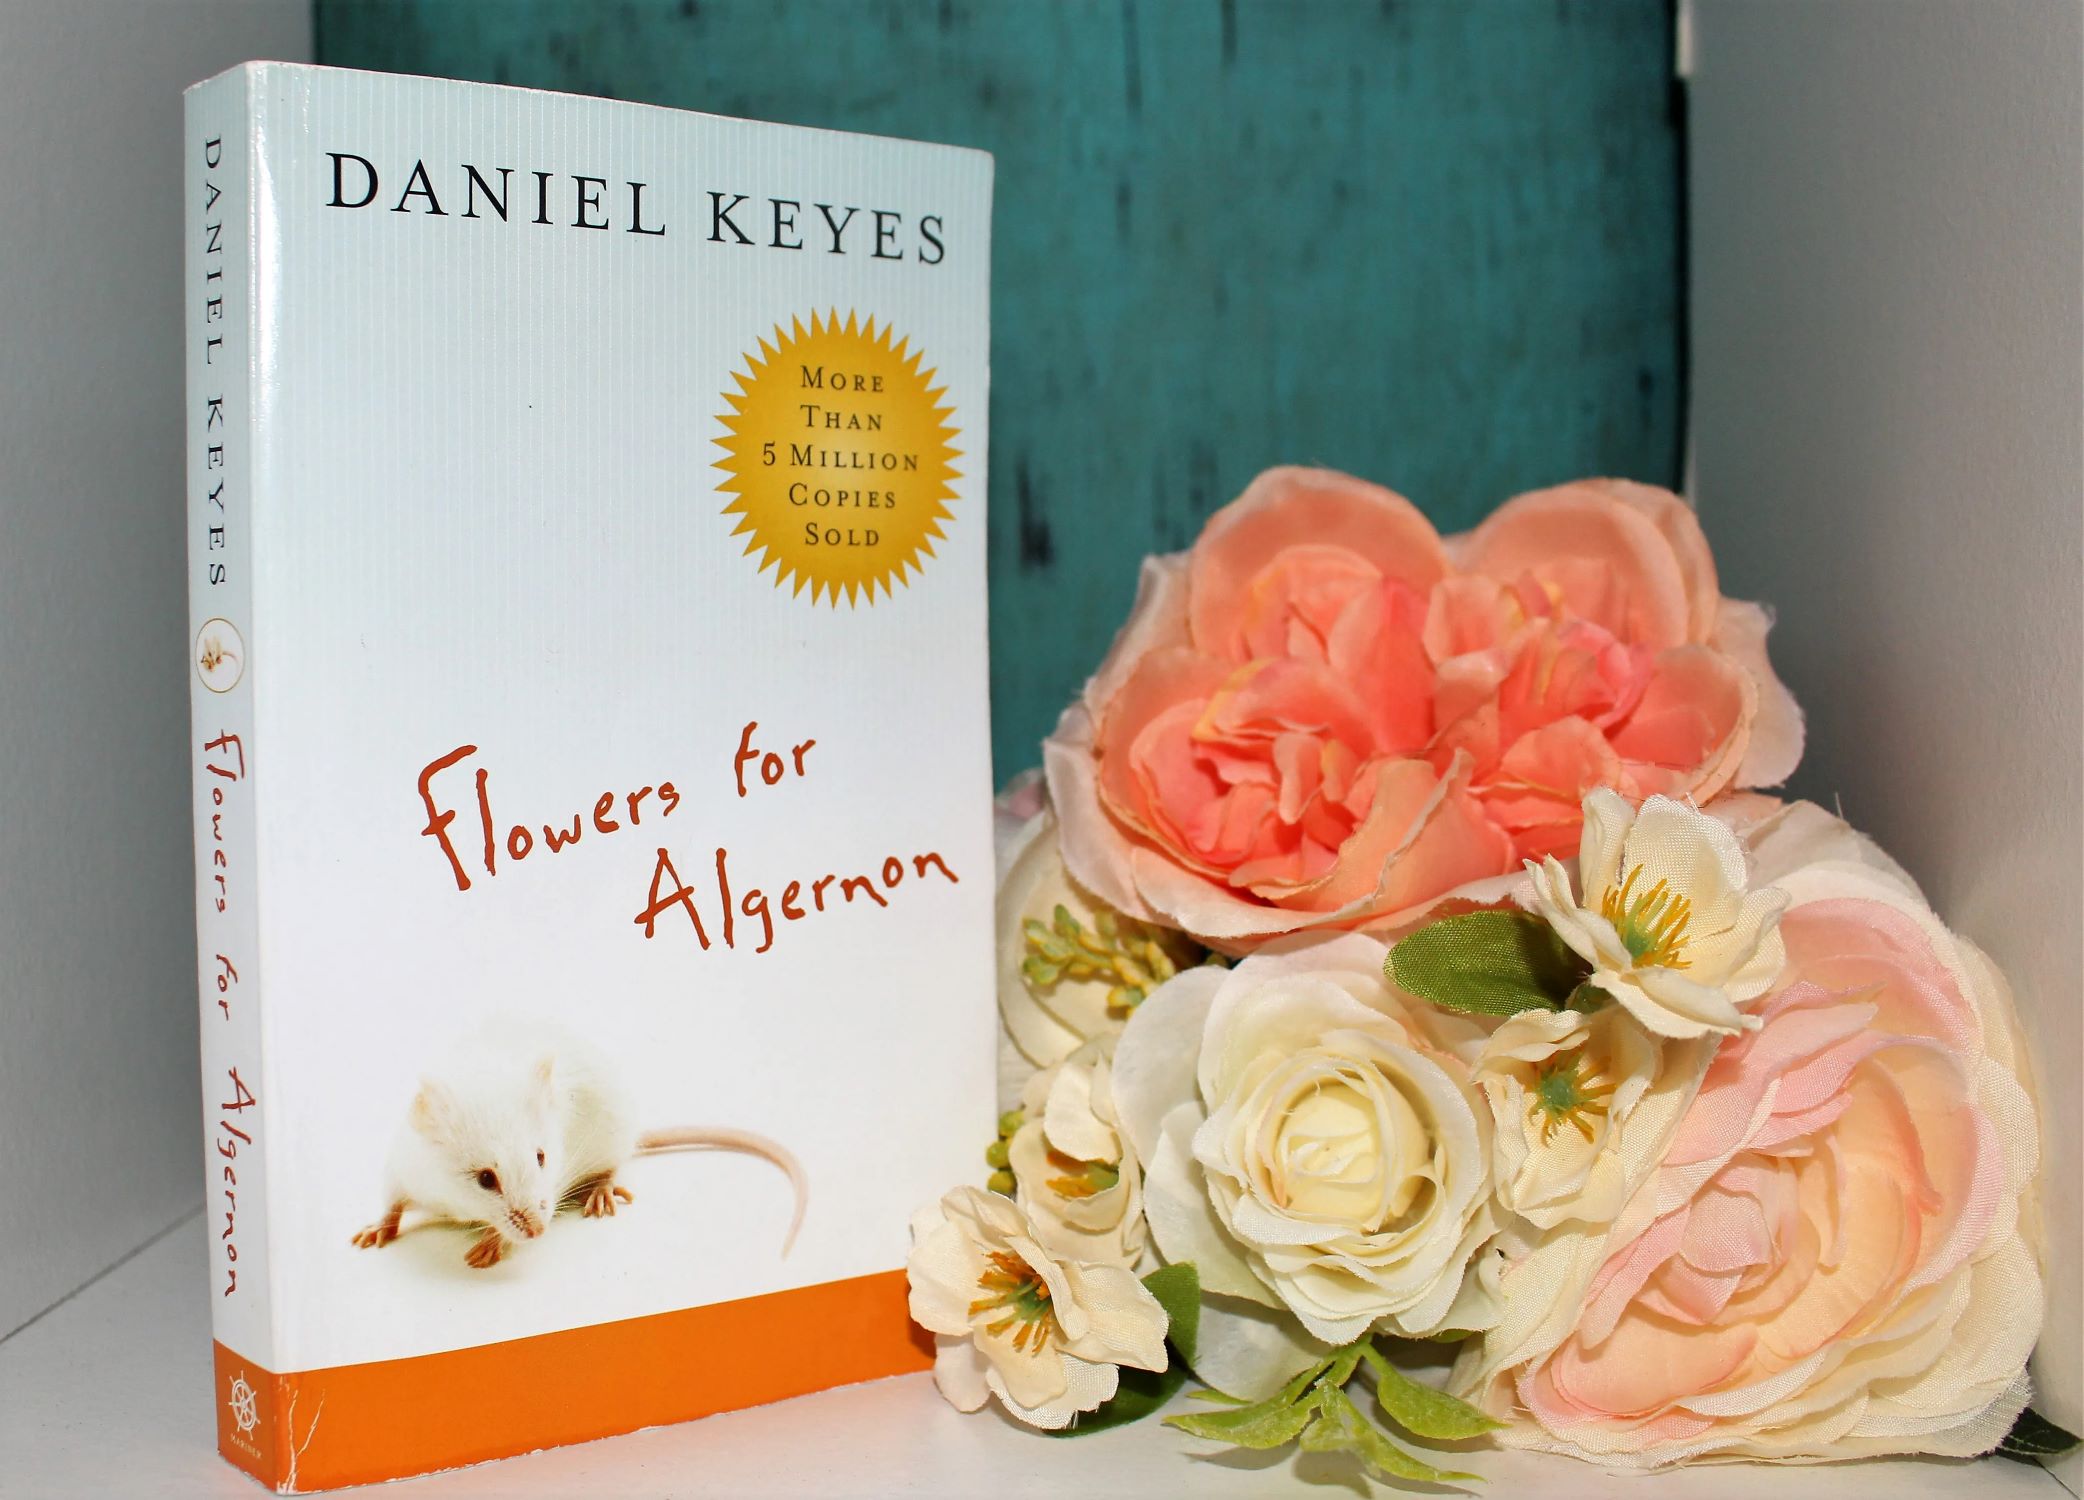 13-enigmatic-facts-about-flowers-for-algernon-daniel-keyes